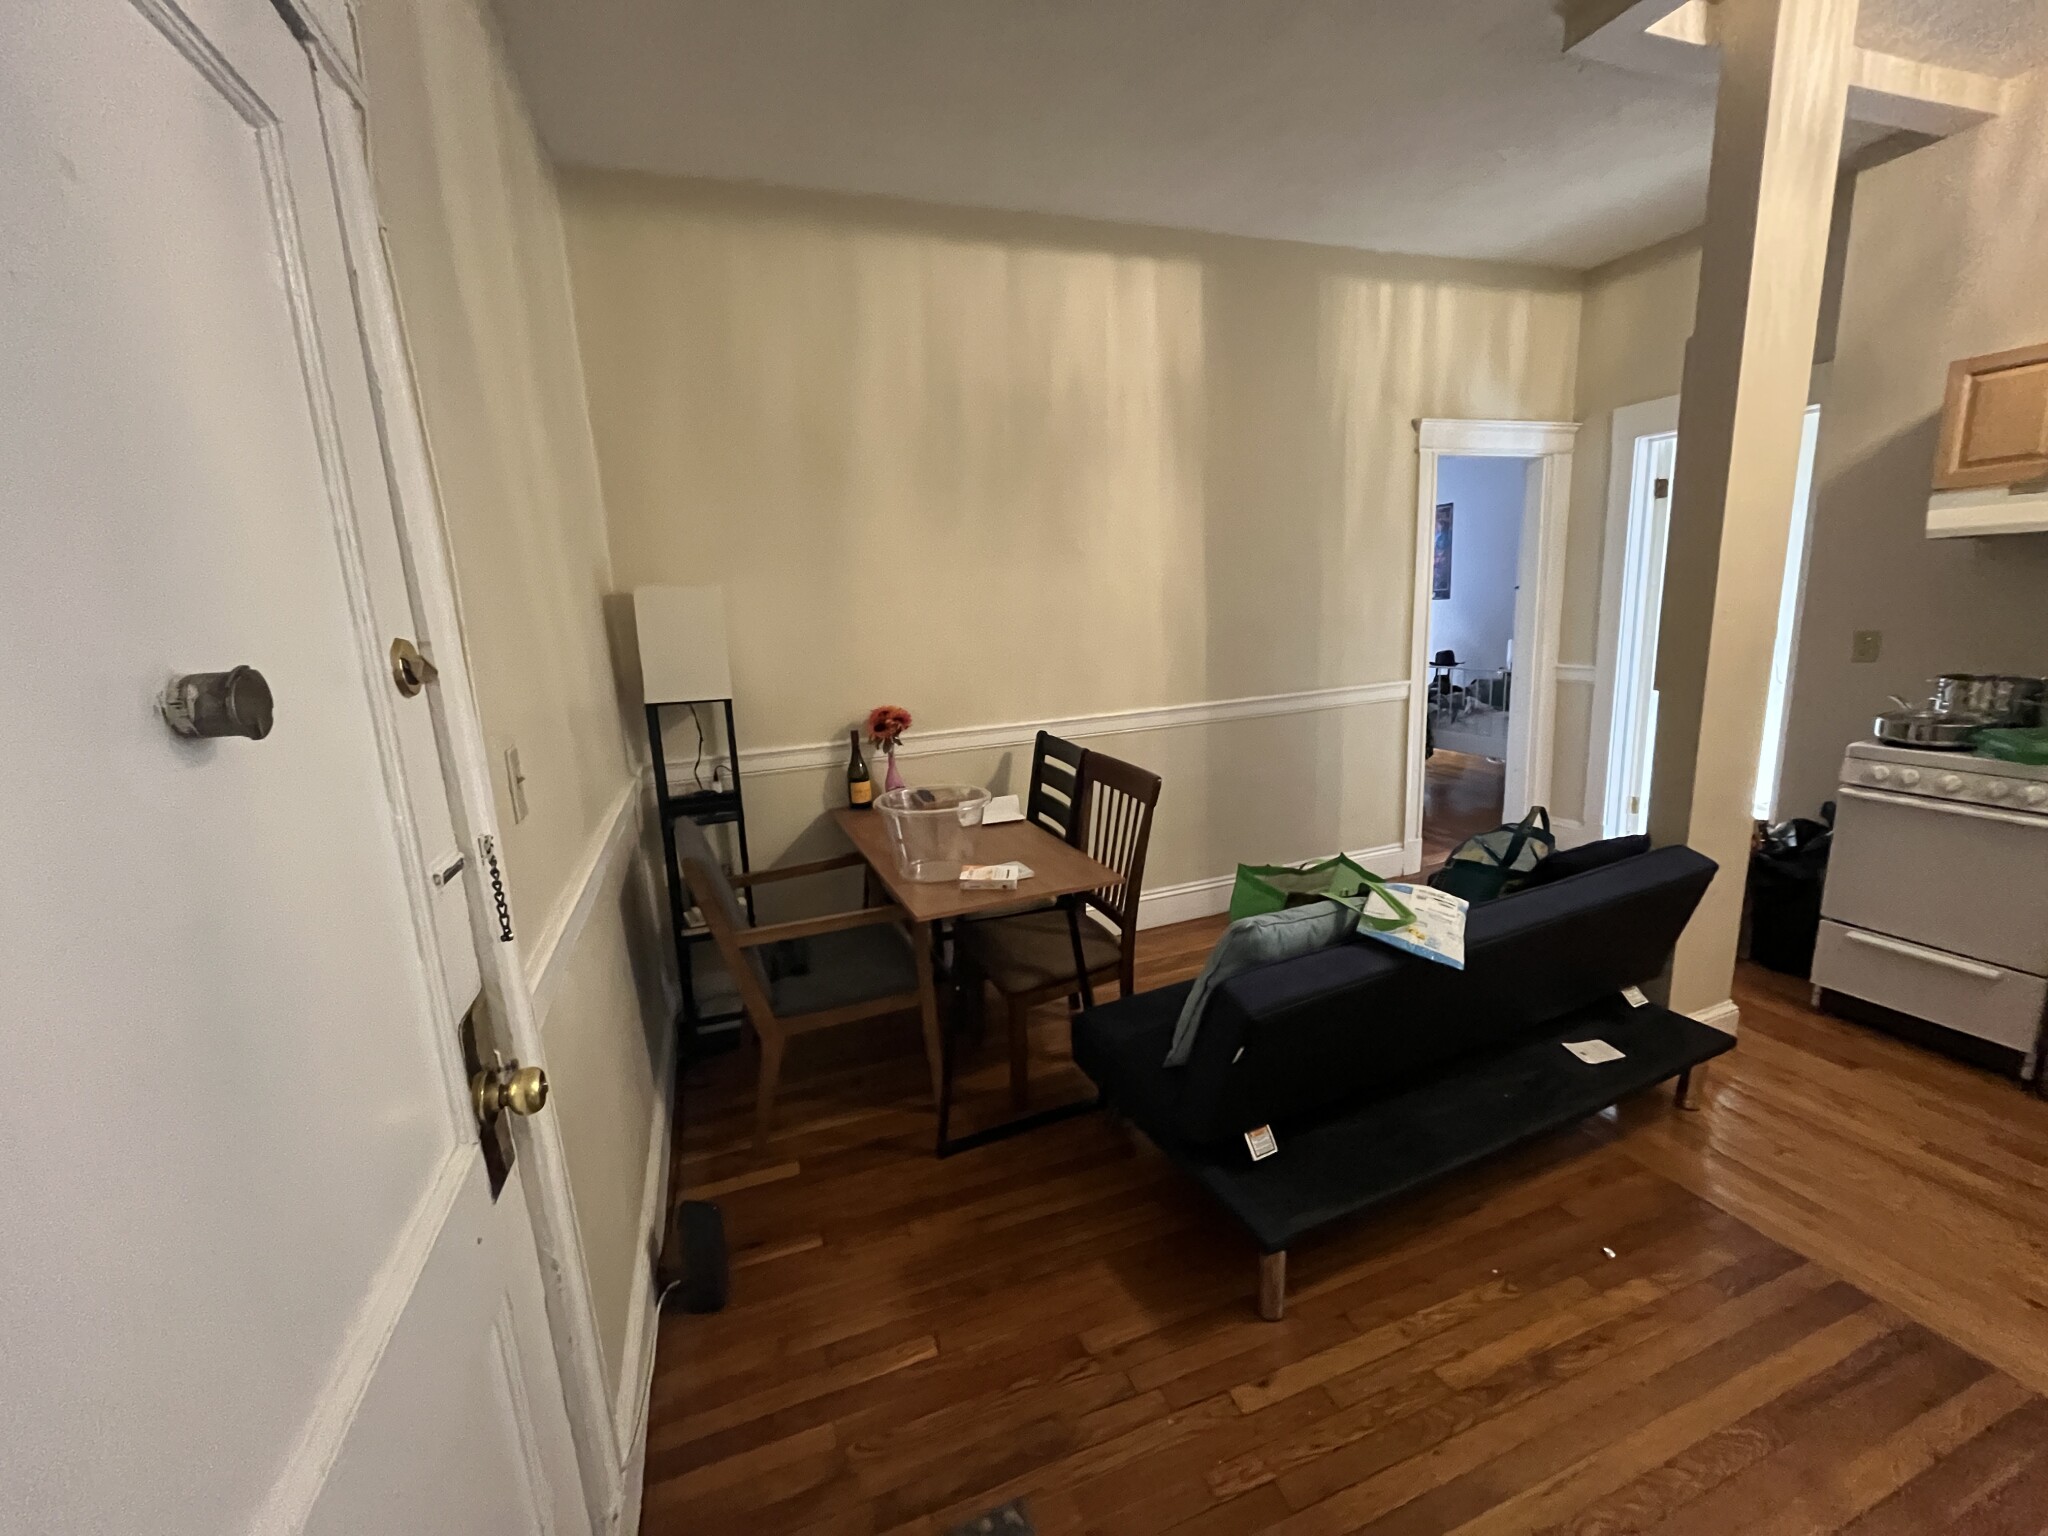 Photos of apartment on Western Ave.,Boston MA 02134